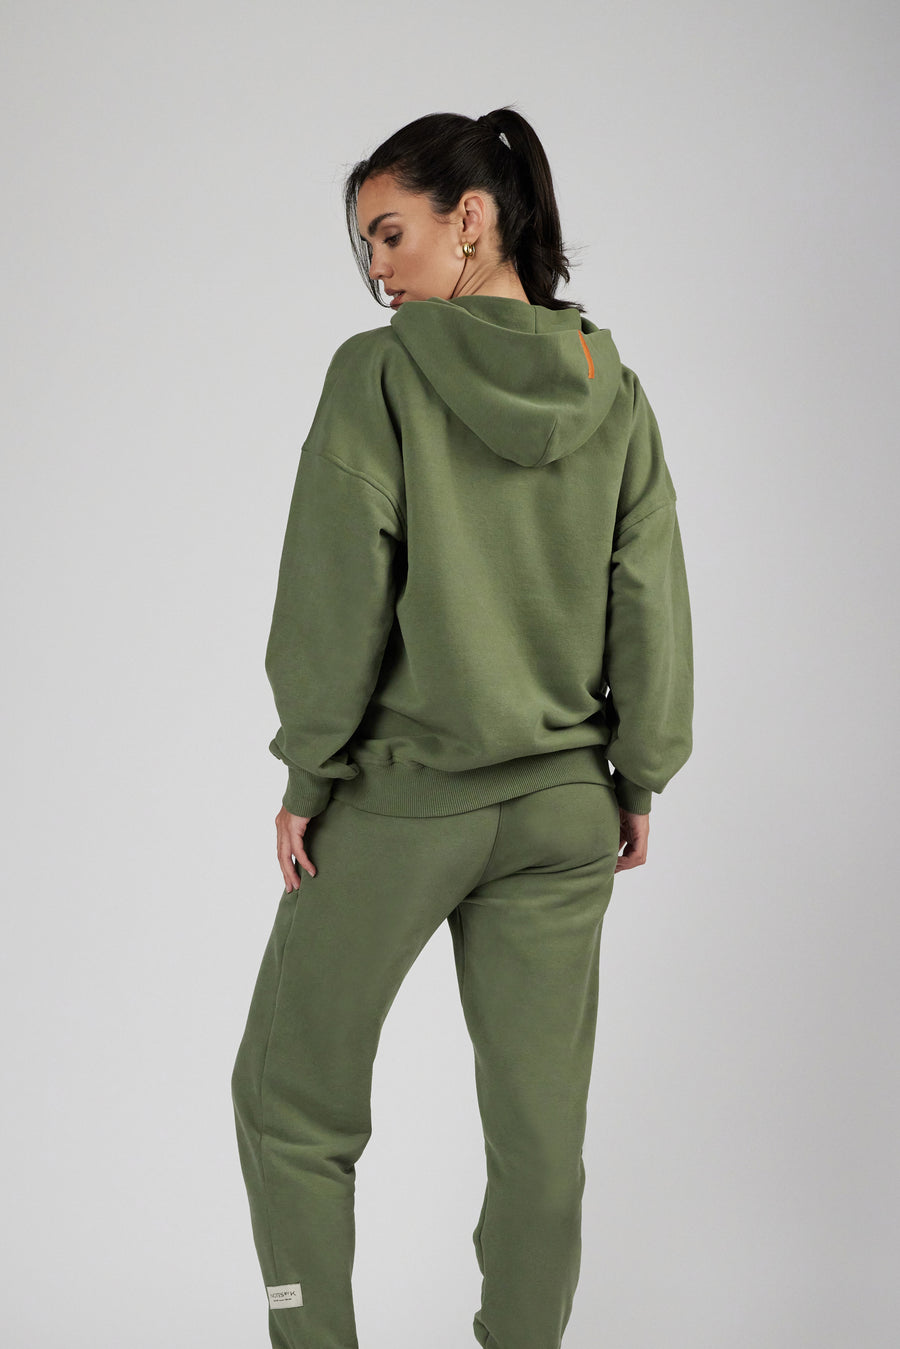 Backside of woman wearing unisex sweatpants and hoodie in color sage green